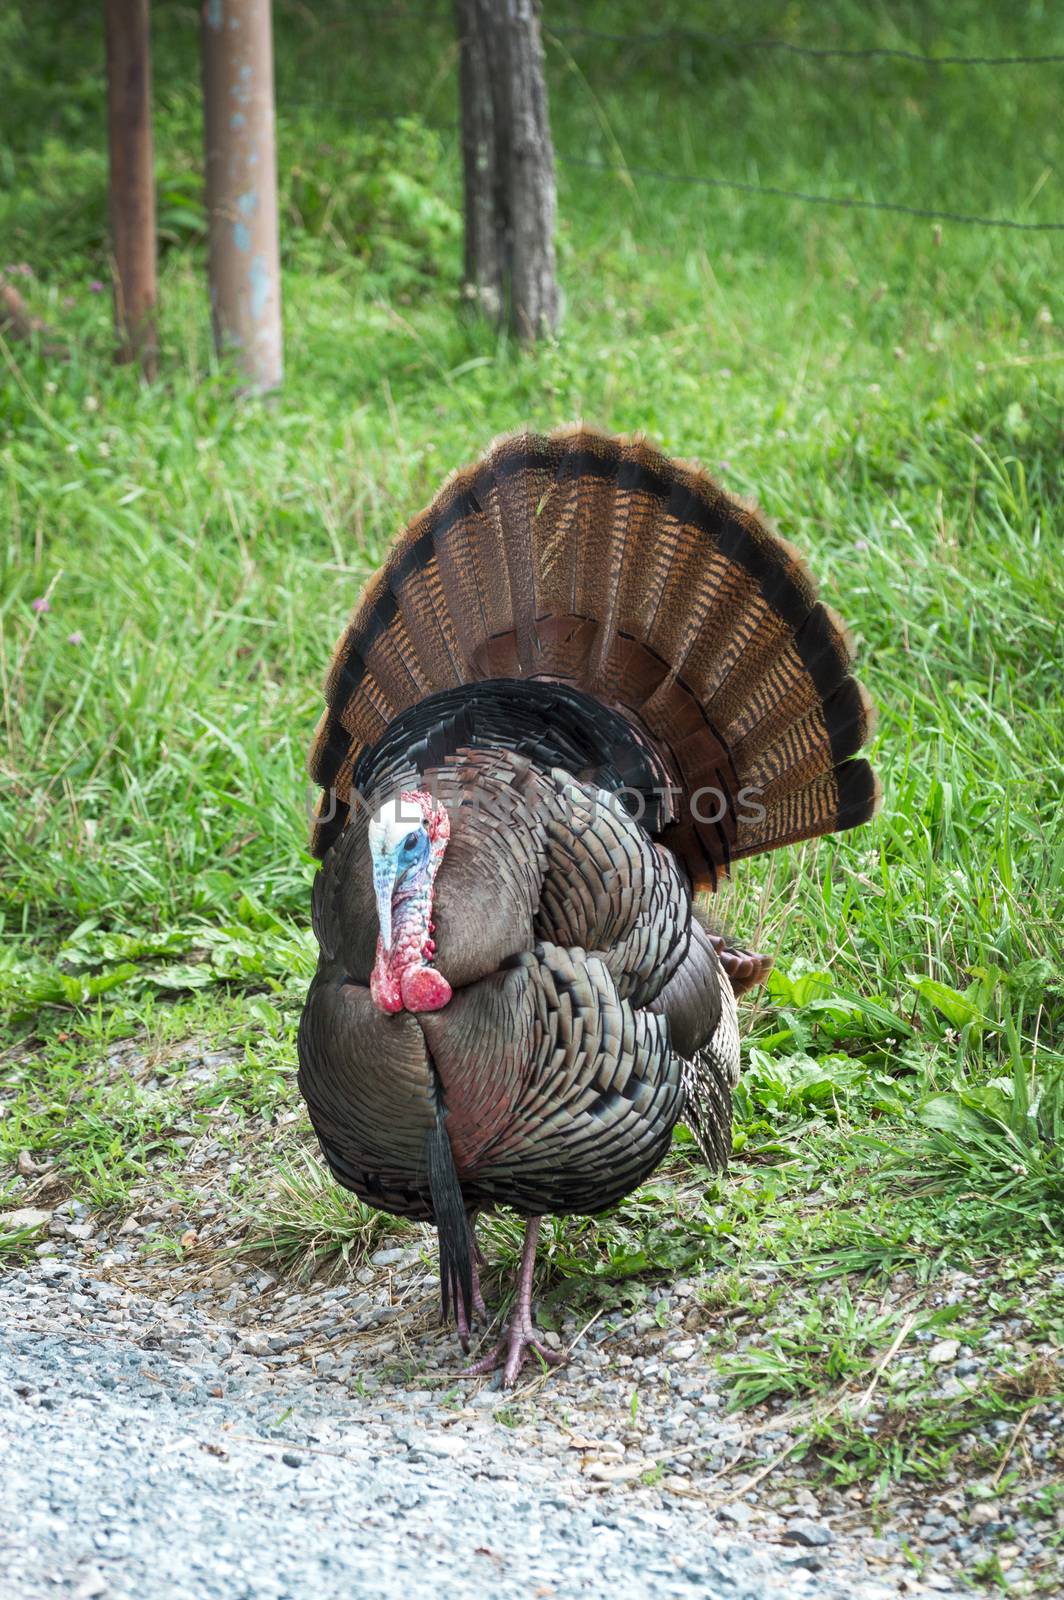 Vertical shot of a wild turkey in Tennessee in a wooded area with green grass.